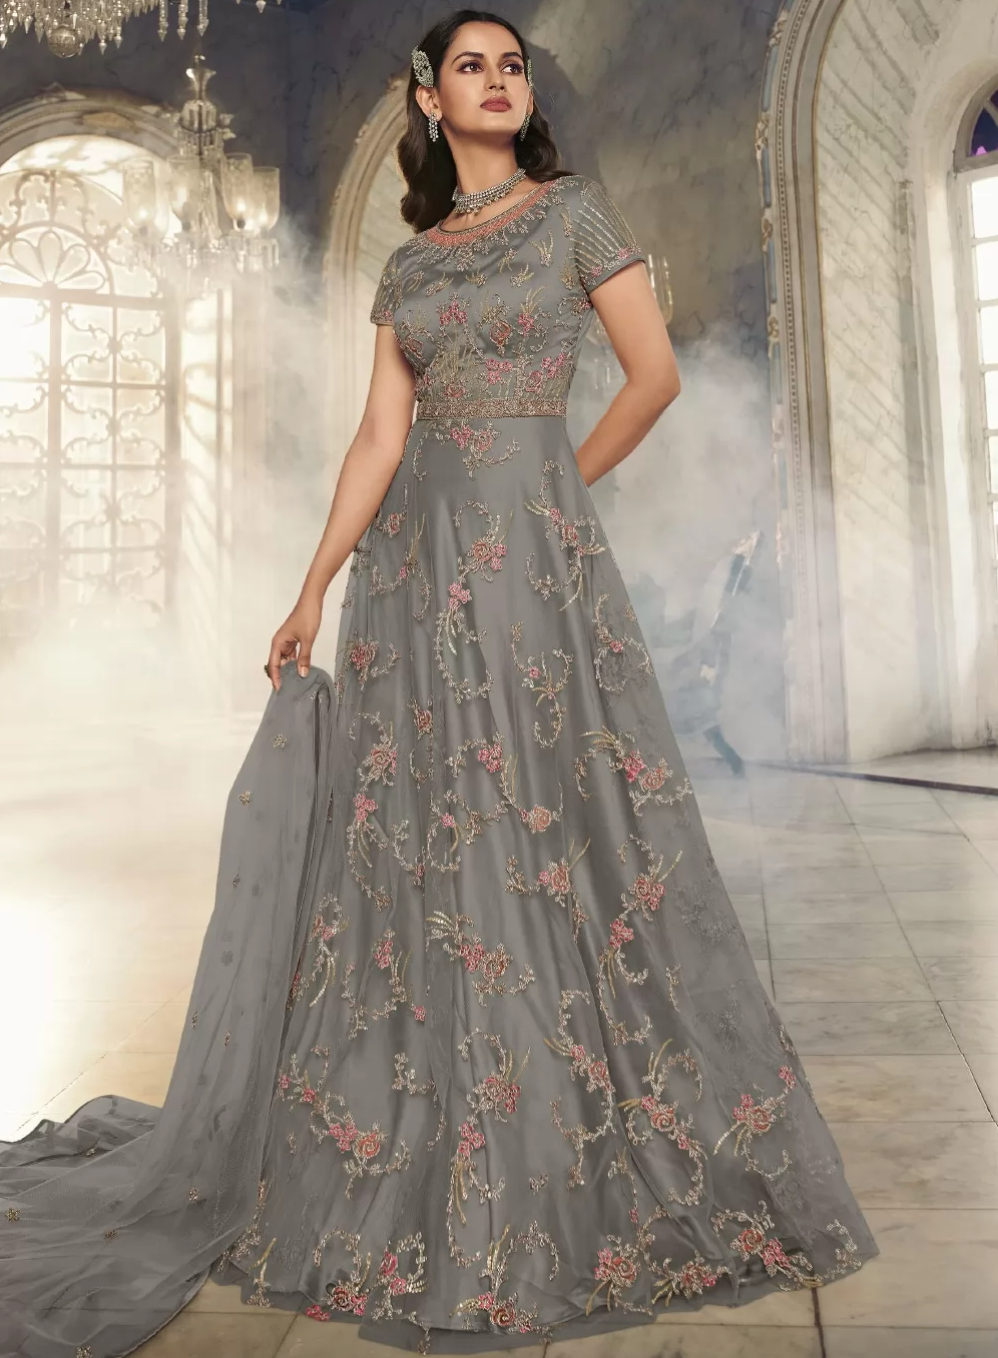 Indian Wedding Party Wear Dress Designer Bollywood Long Gown ready made  stitched | eBay